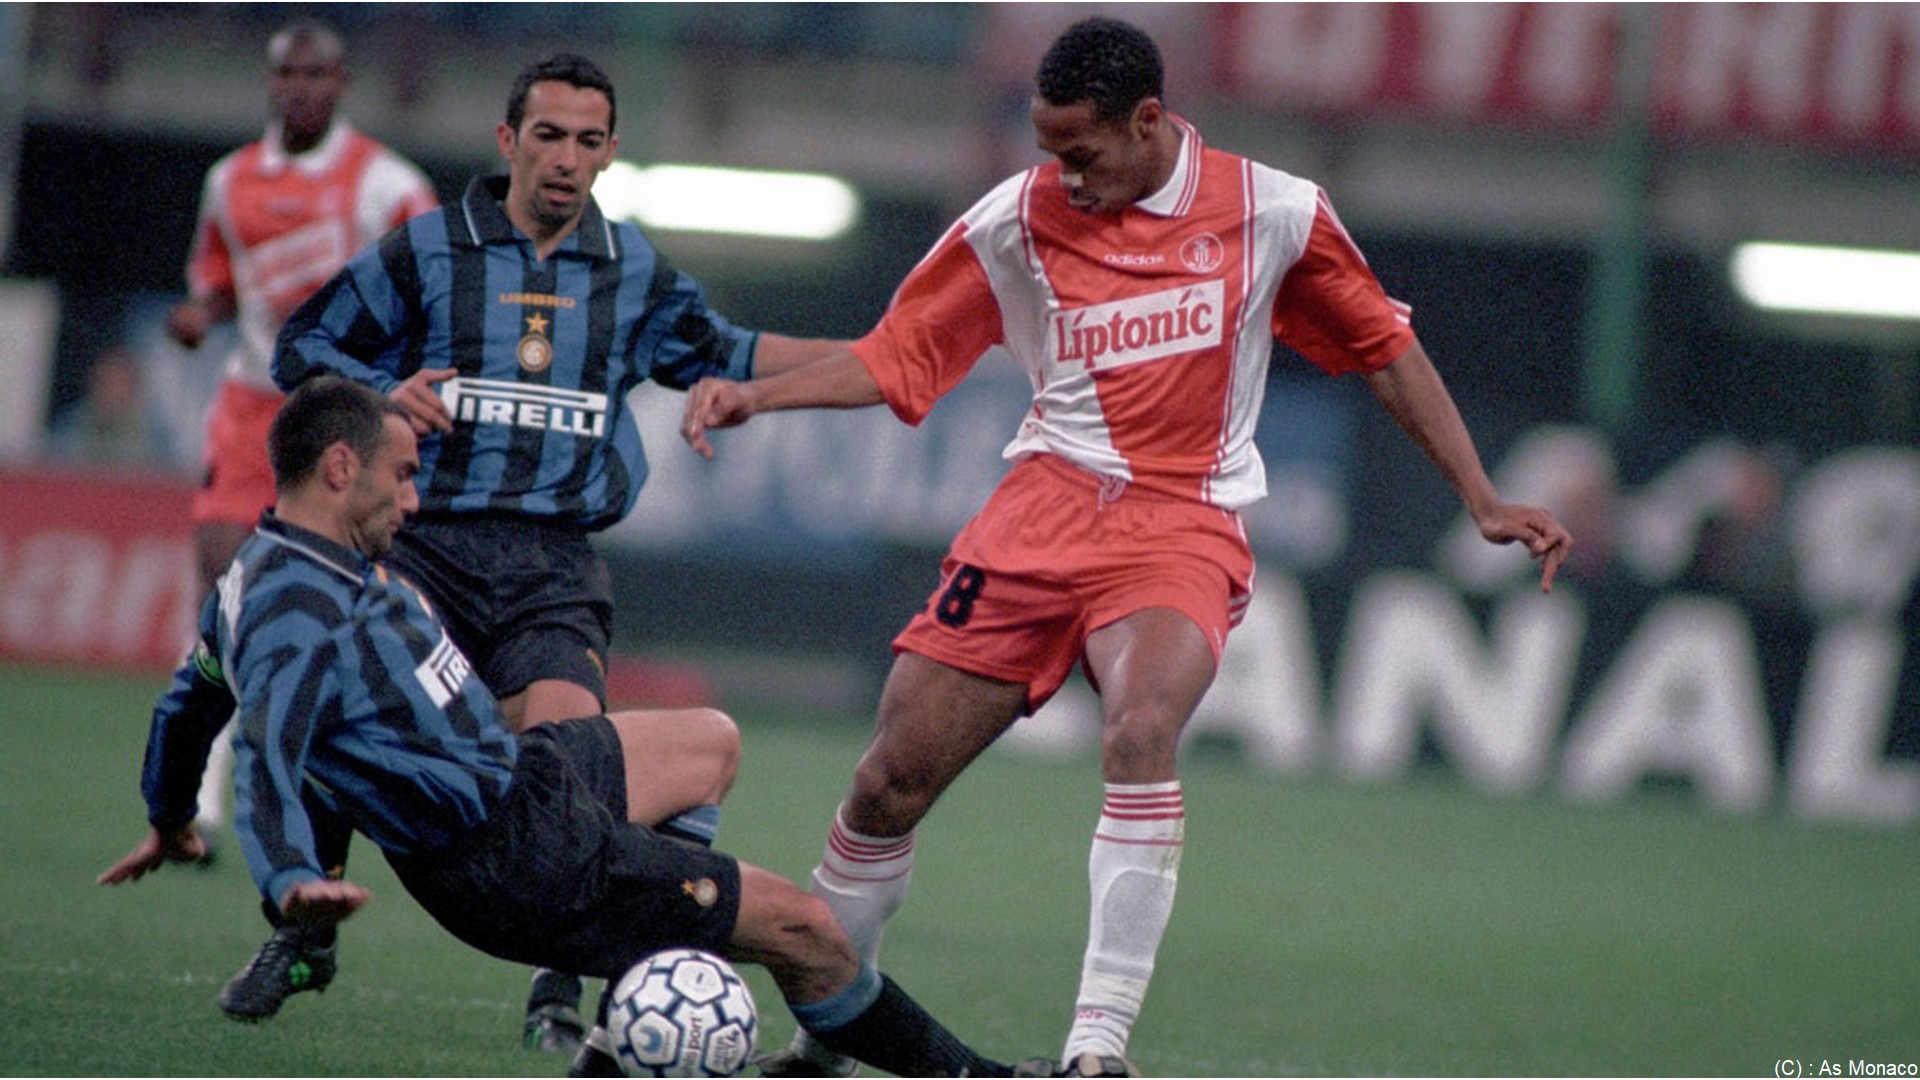 As Monaco Thierry Henry